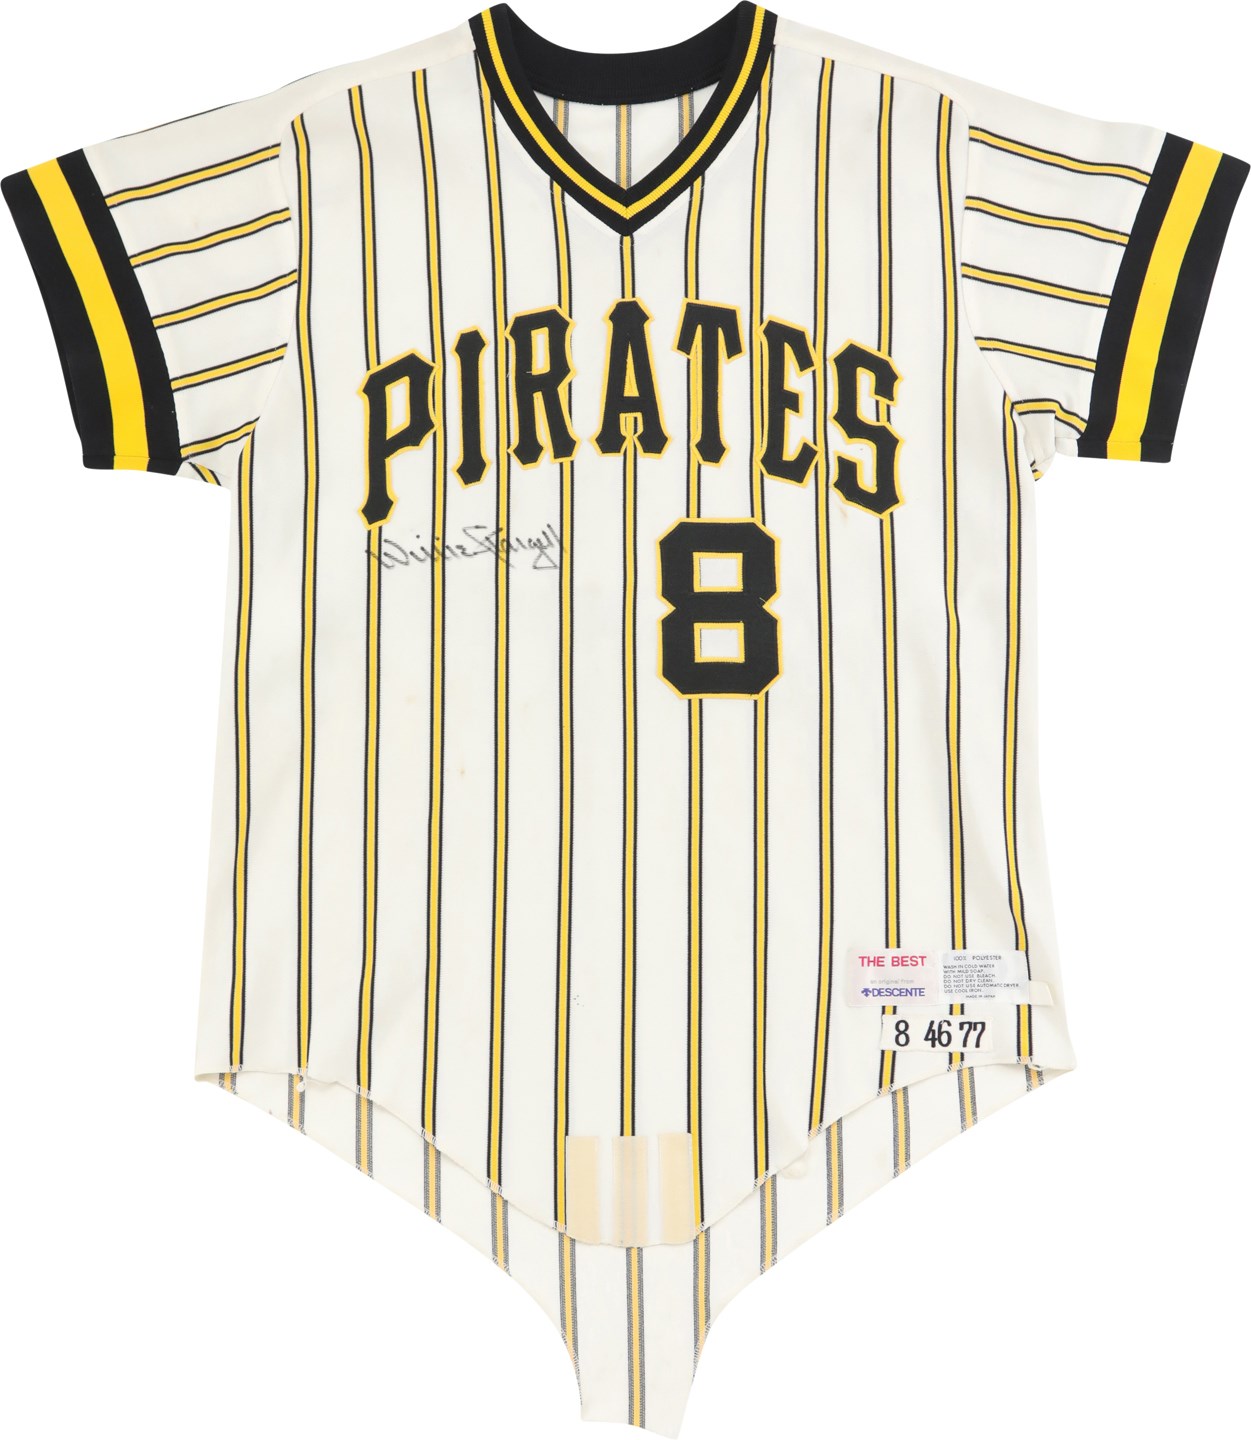 Clemente and Pittsburgh Pirates - 1977 Willie Stargell Pittsburgh Pirates Signed Game Worn Jersey (MEARS A9.5)